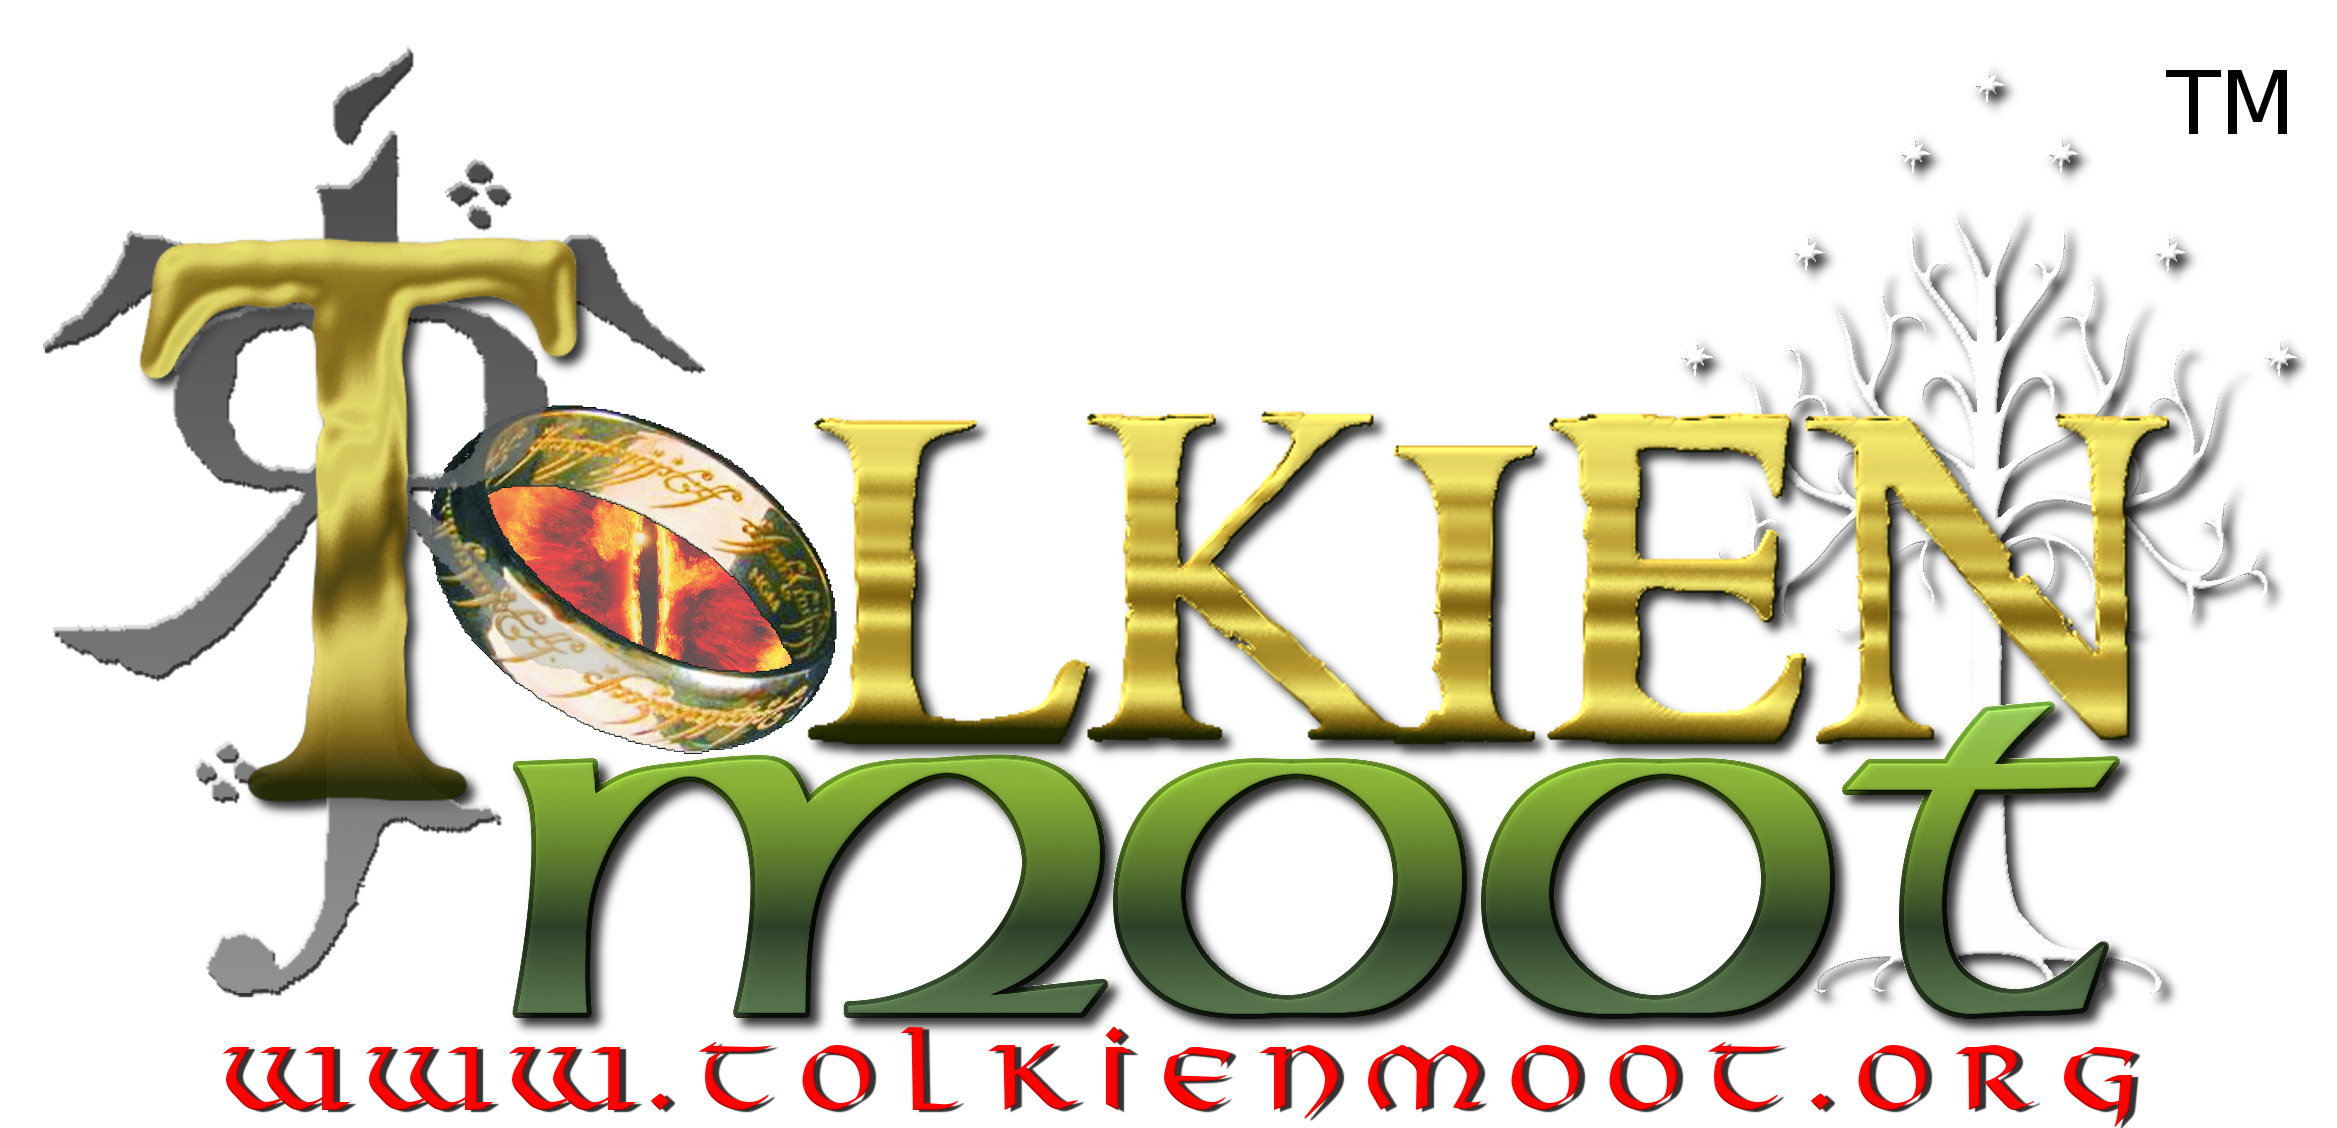 TolkienMoot XI July 17-19 - RSVP Today!